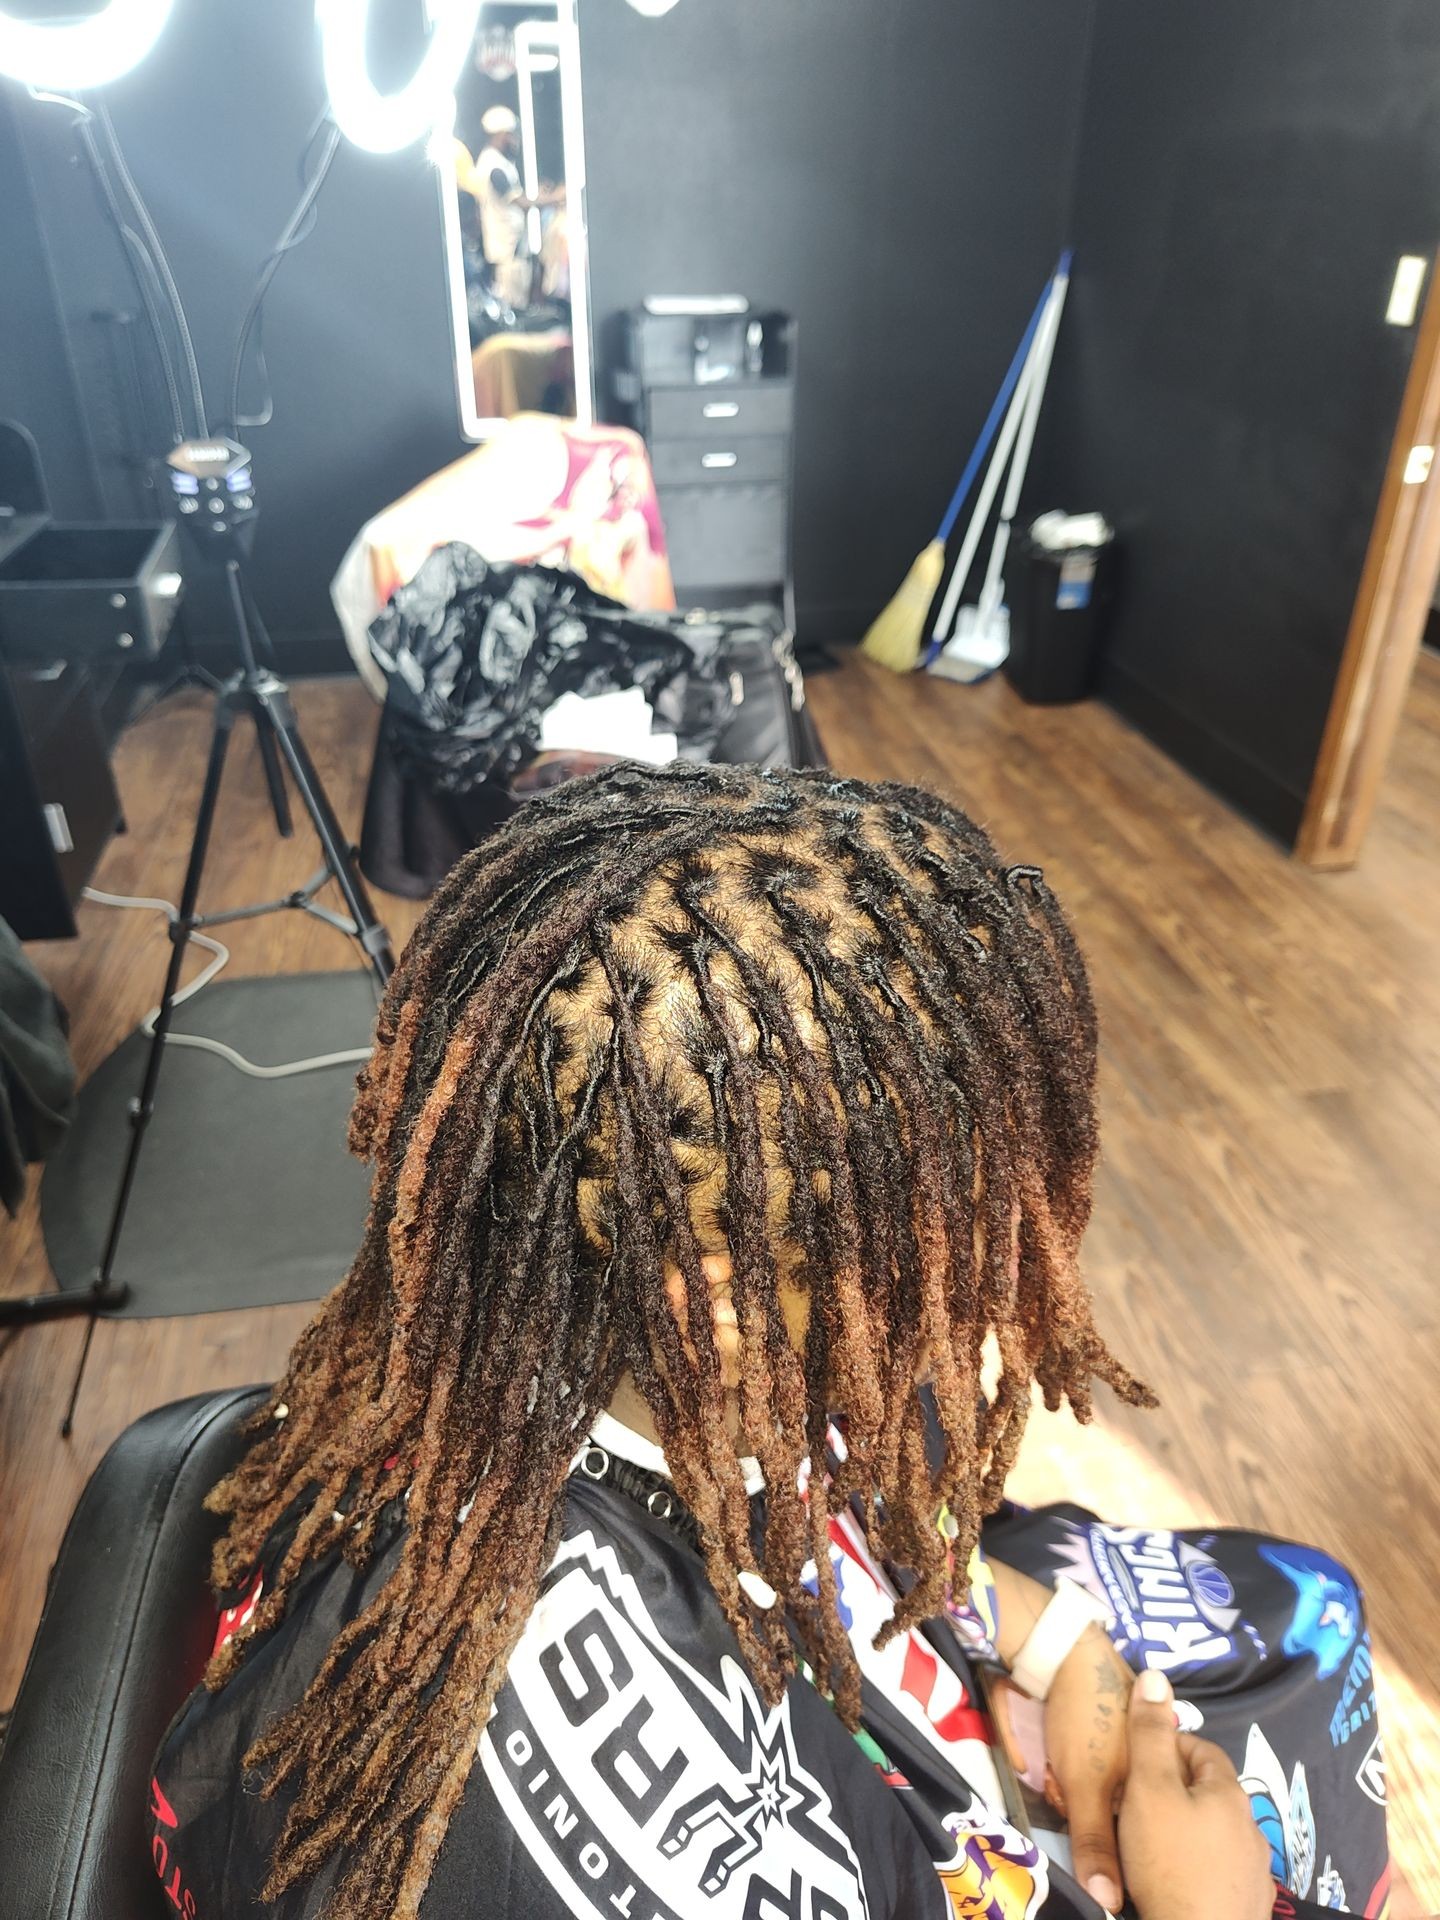 The image captures the artistry and care involved in a loc retwist, showcasing the meticulous process of maintaining and refreshing locs. Each loc is attentively separated, twisted, and secured at the roots to ensure a neat and uniform appearance. This method not only preserves the integrity of the locs but also promotes healthy hair growth and longevity.